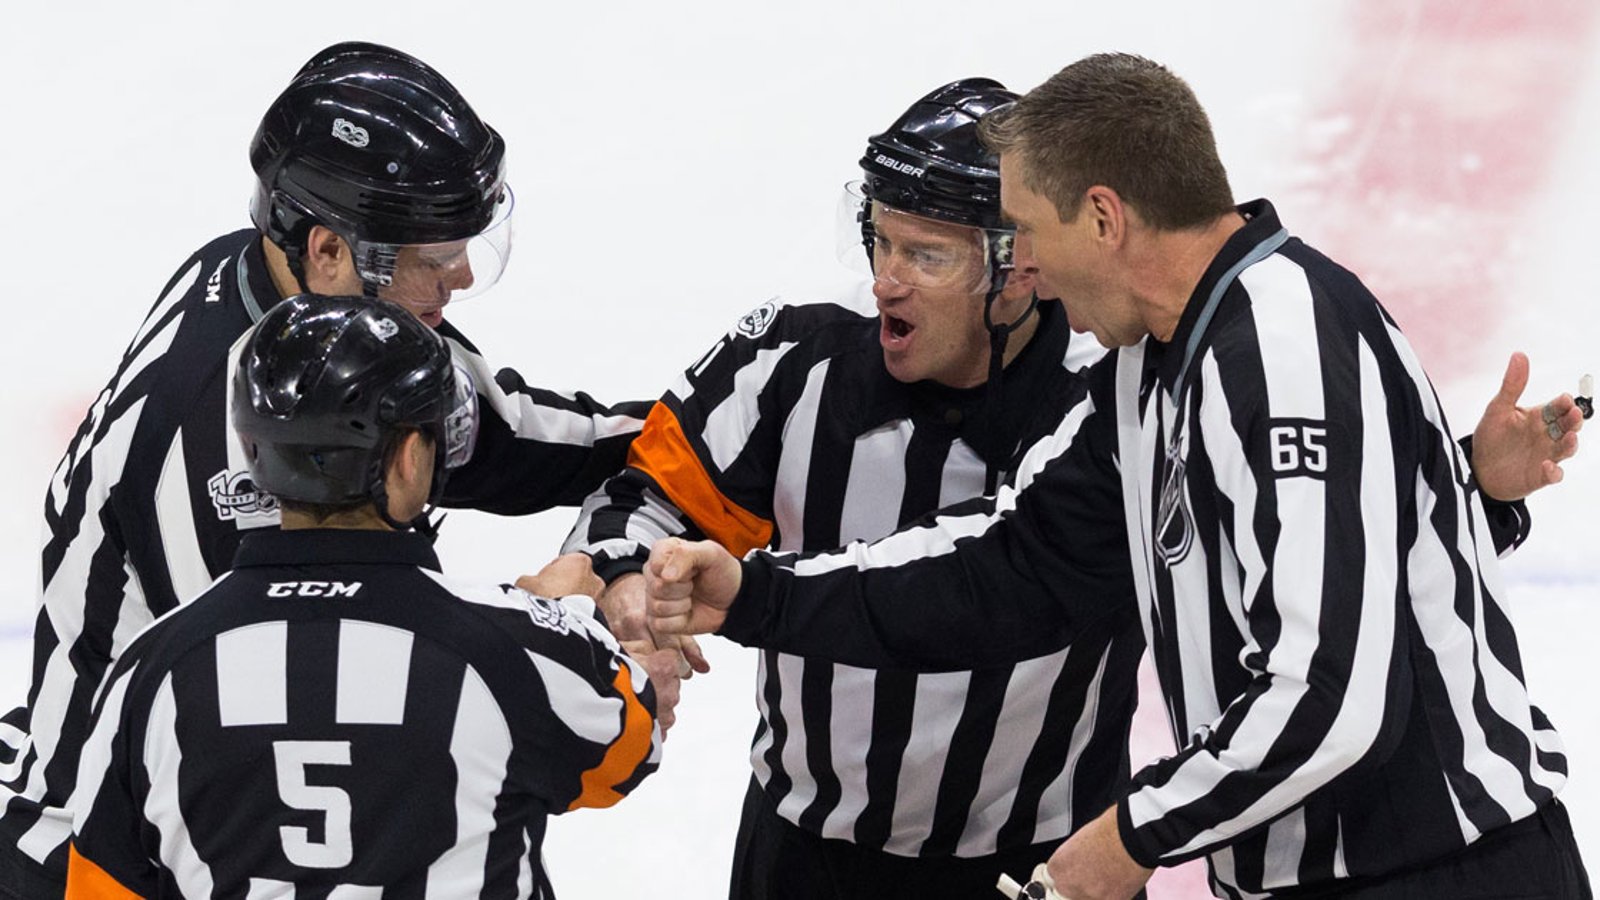 How much do referees make in the NHL?